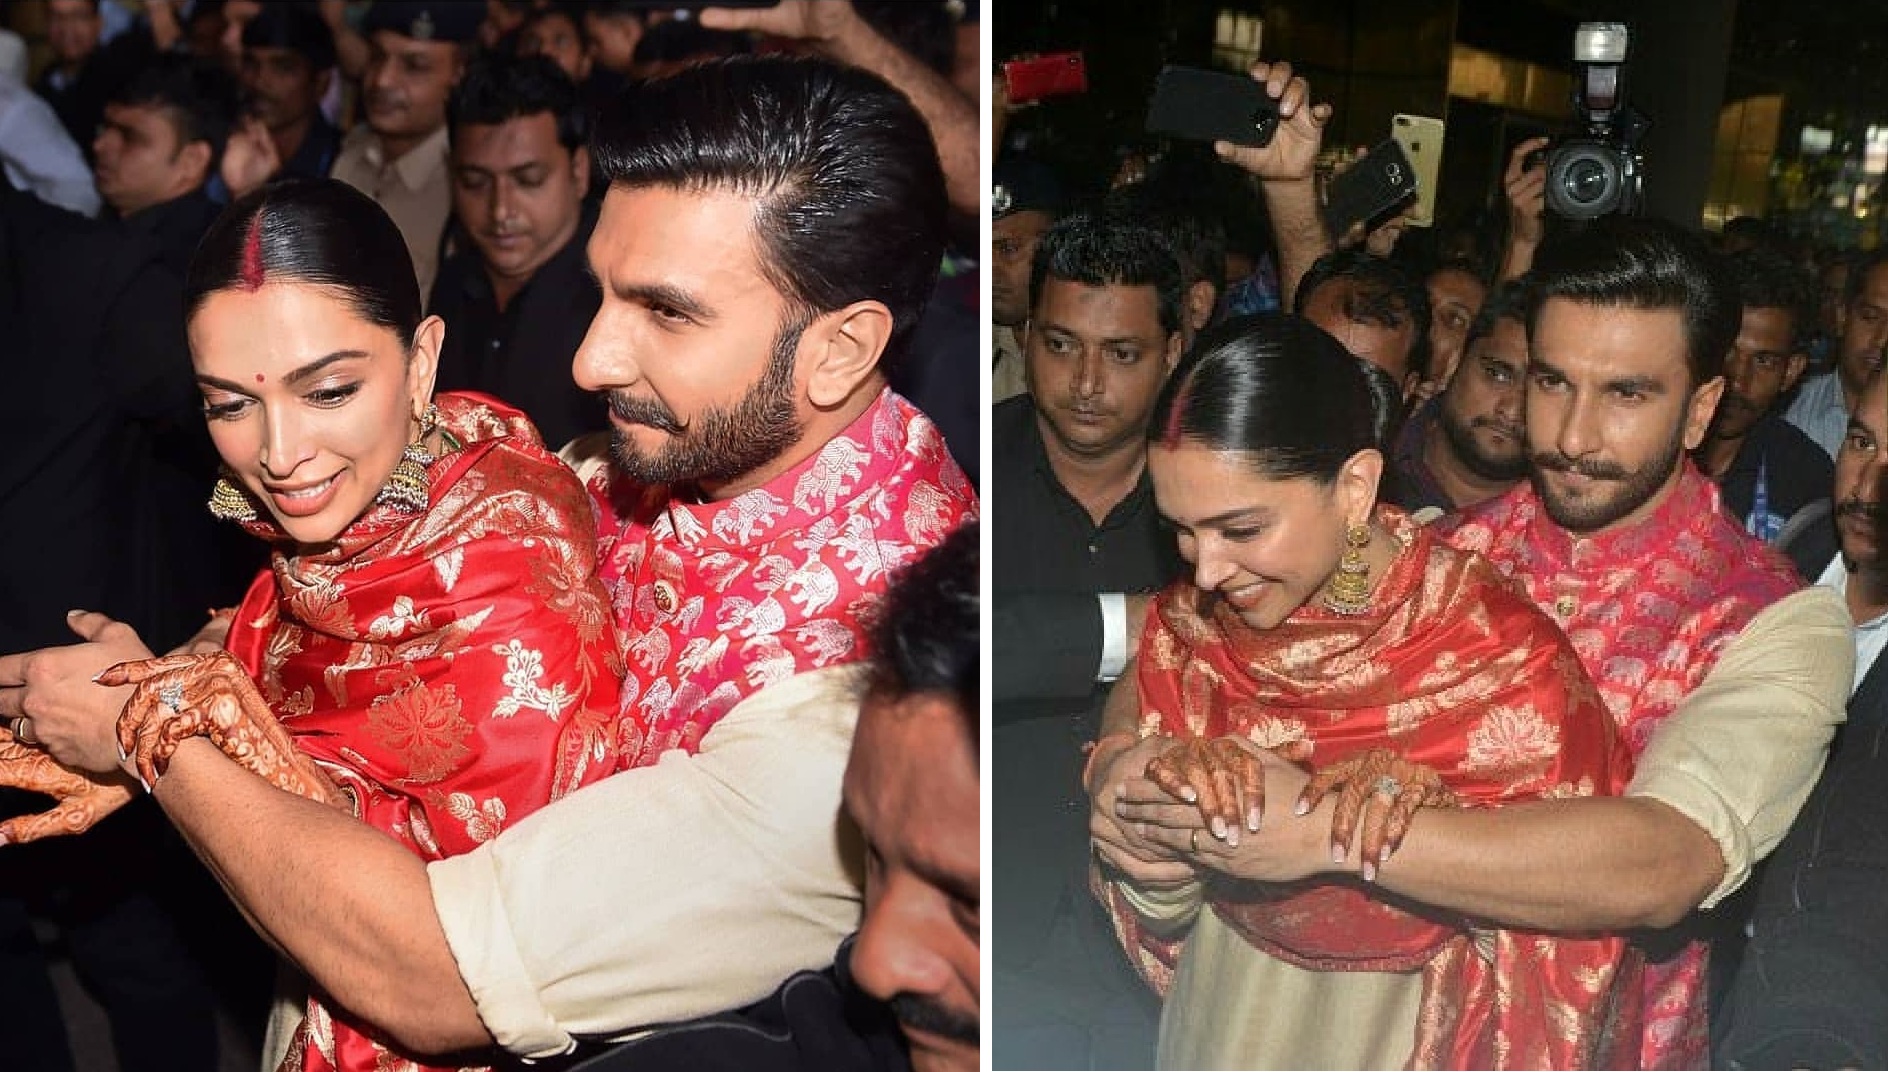 Pictures Of Ranveer Singh ‘Guarding’ Deepika From Crowd At The Airport Go Viral..